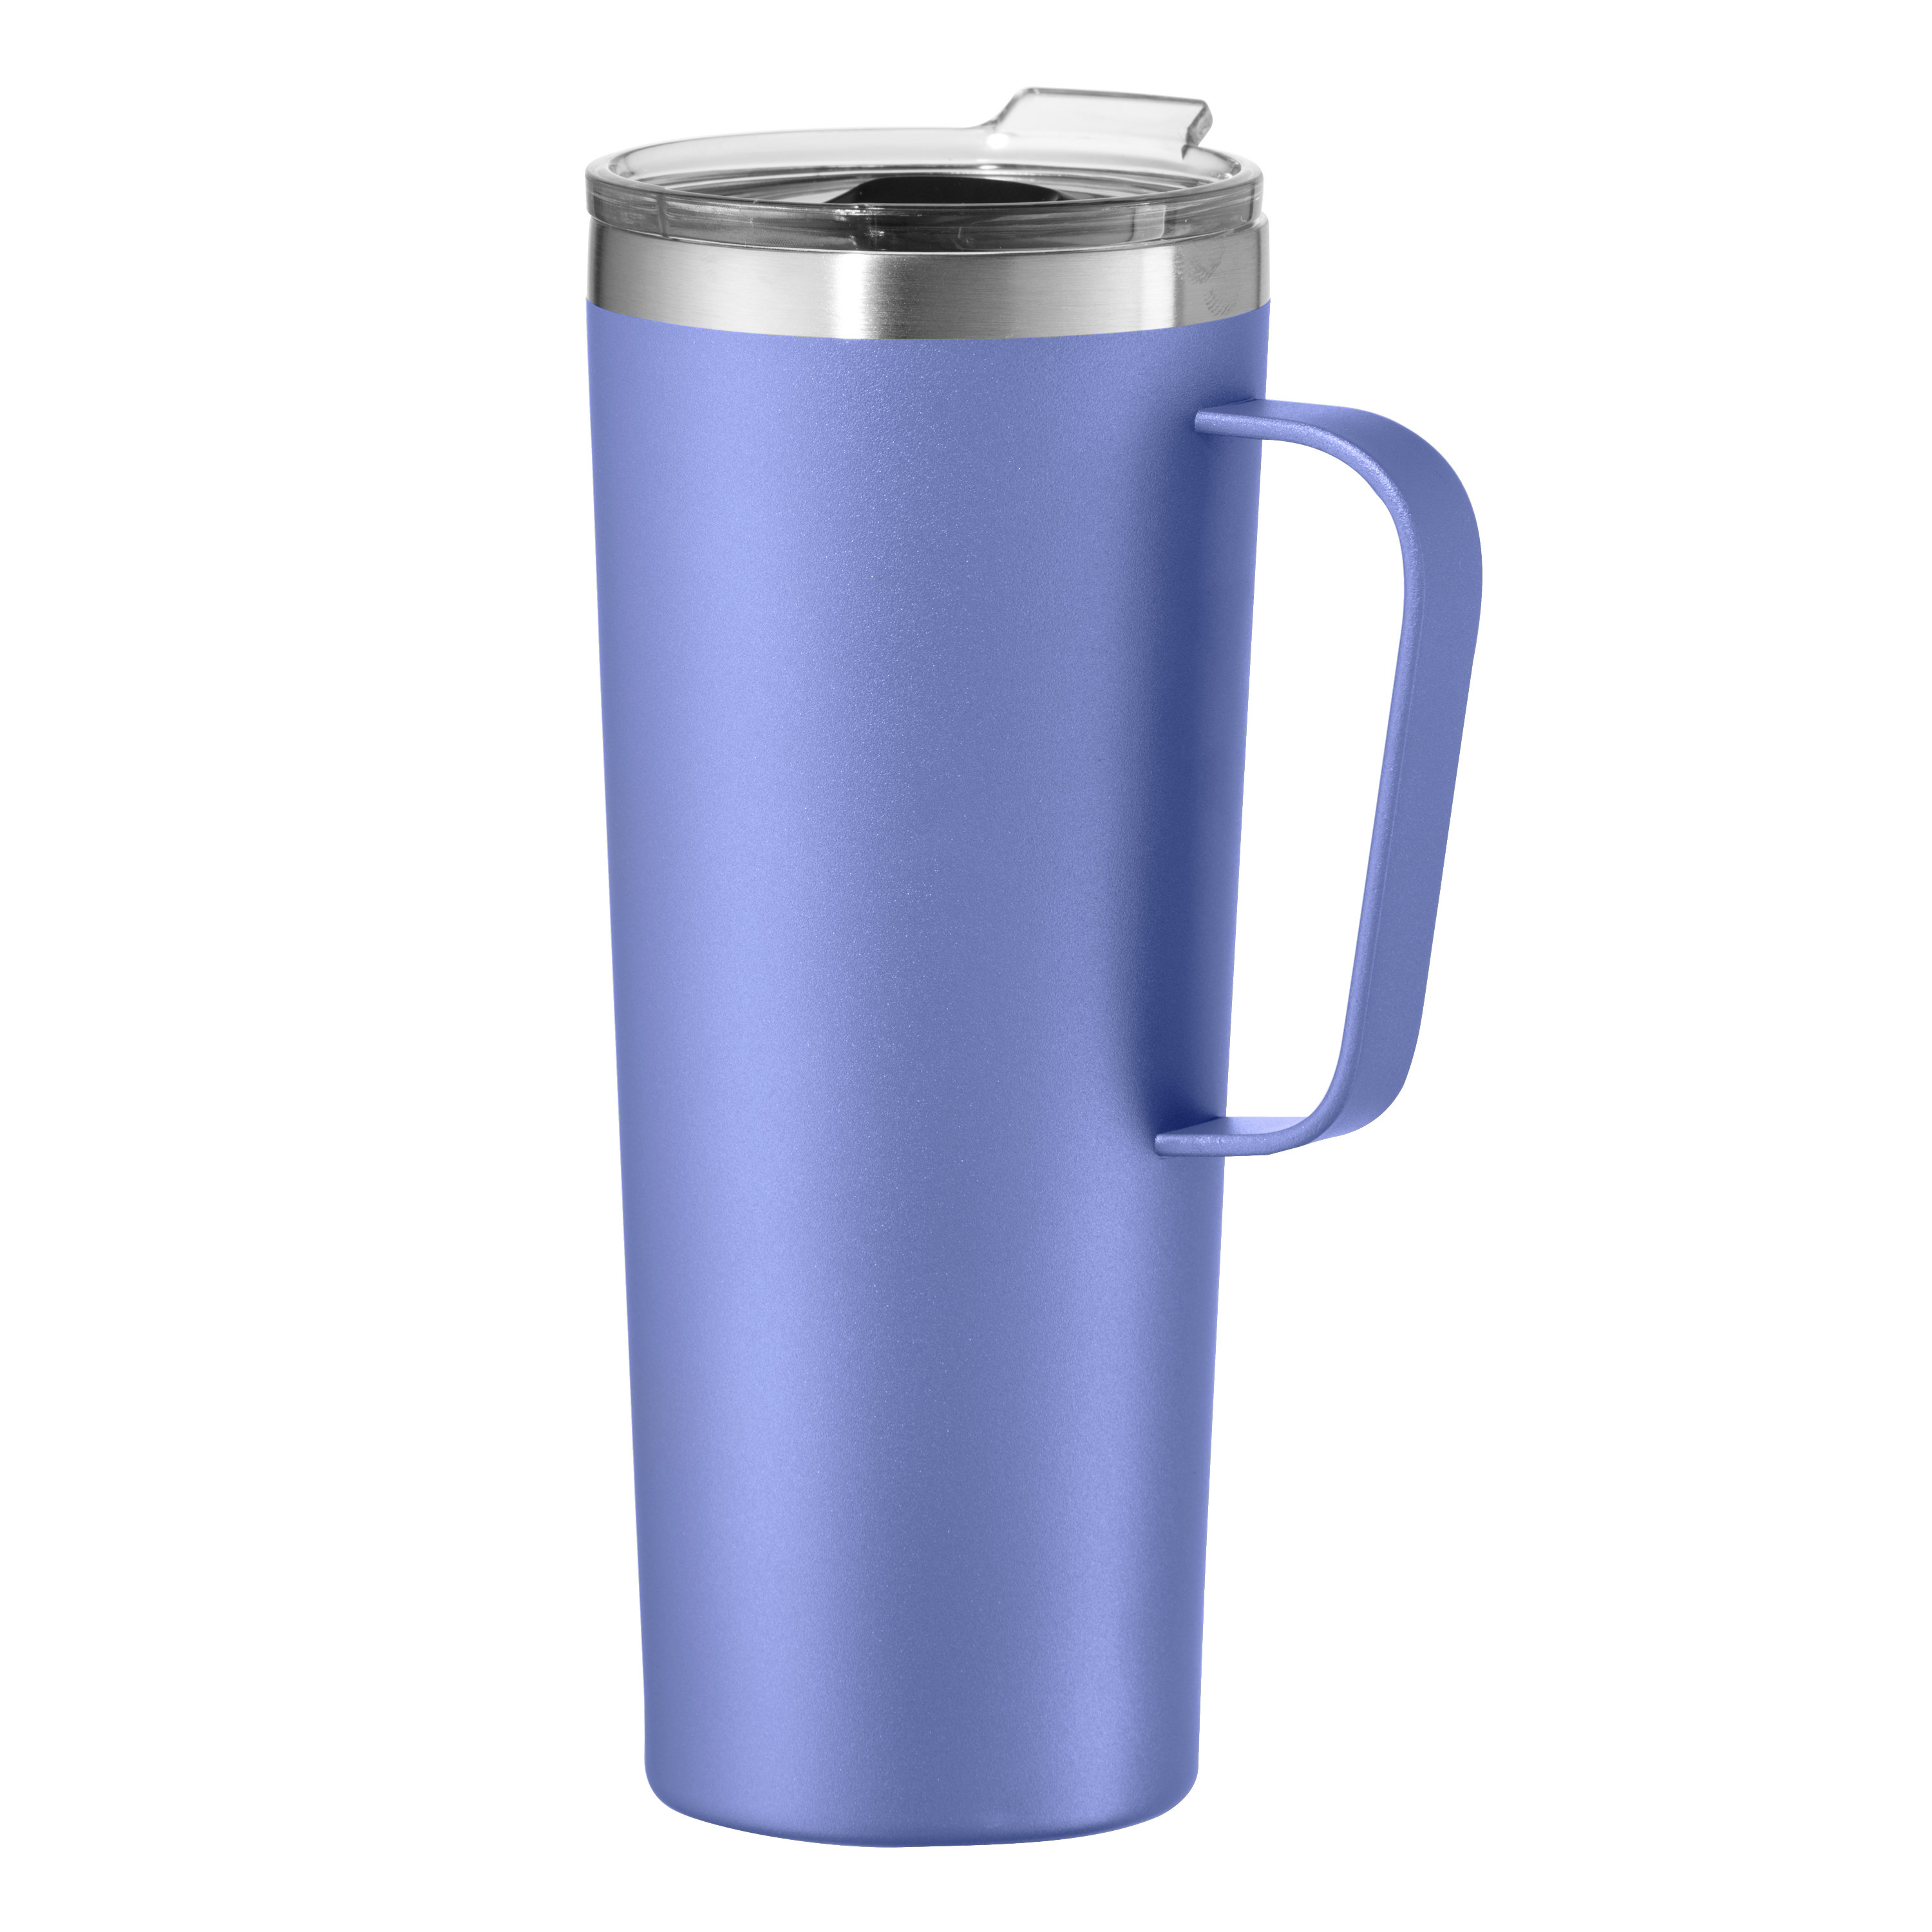 Quick Heating Cooling Cup Home Office Cold Drink Machine Insulation Cup  Refrigerator Quick Aluminium Cooler Mug Holder